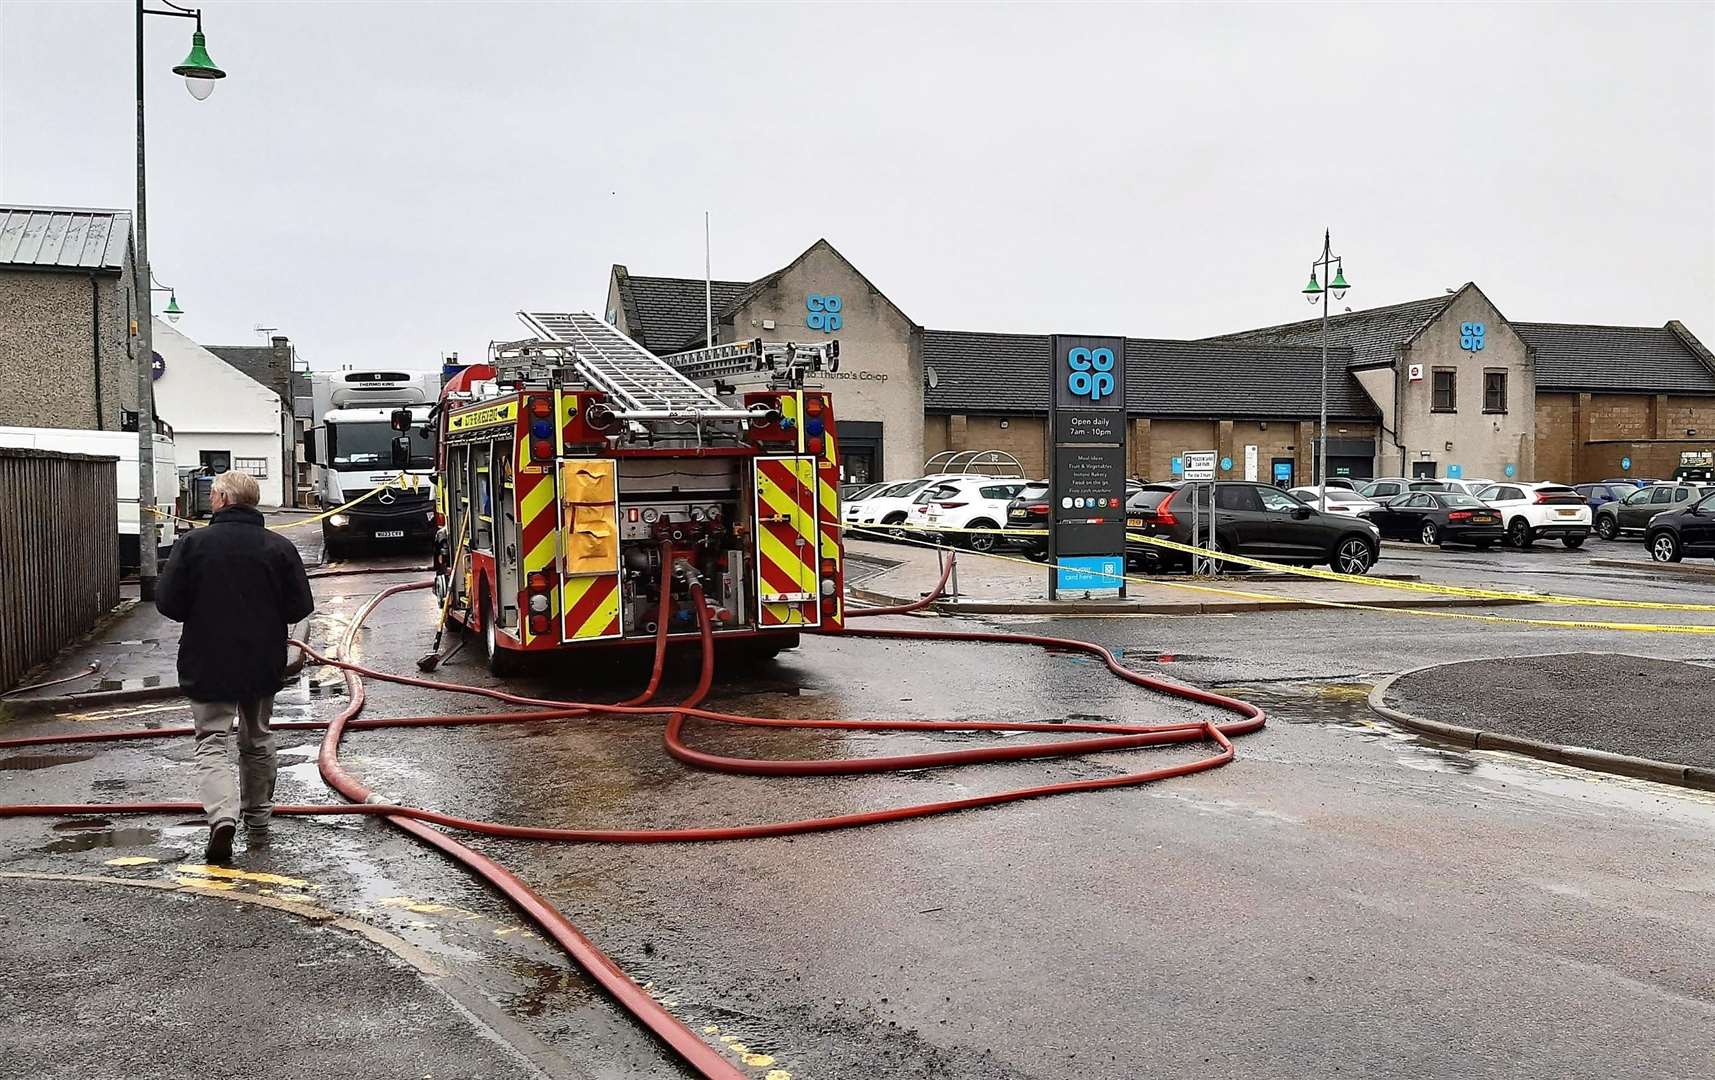 Fire crew members in Thurso help clear drains as part of an exercise near the town's Co-op.